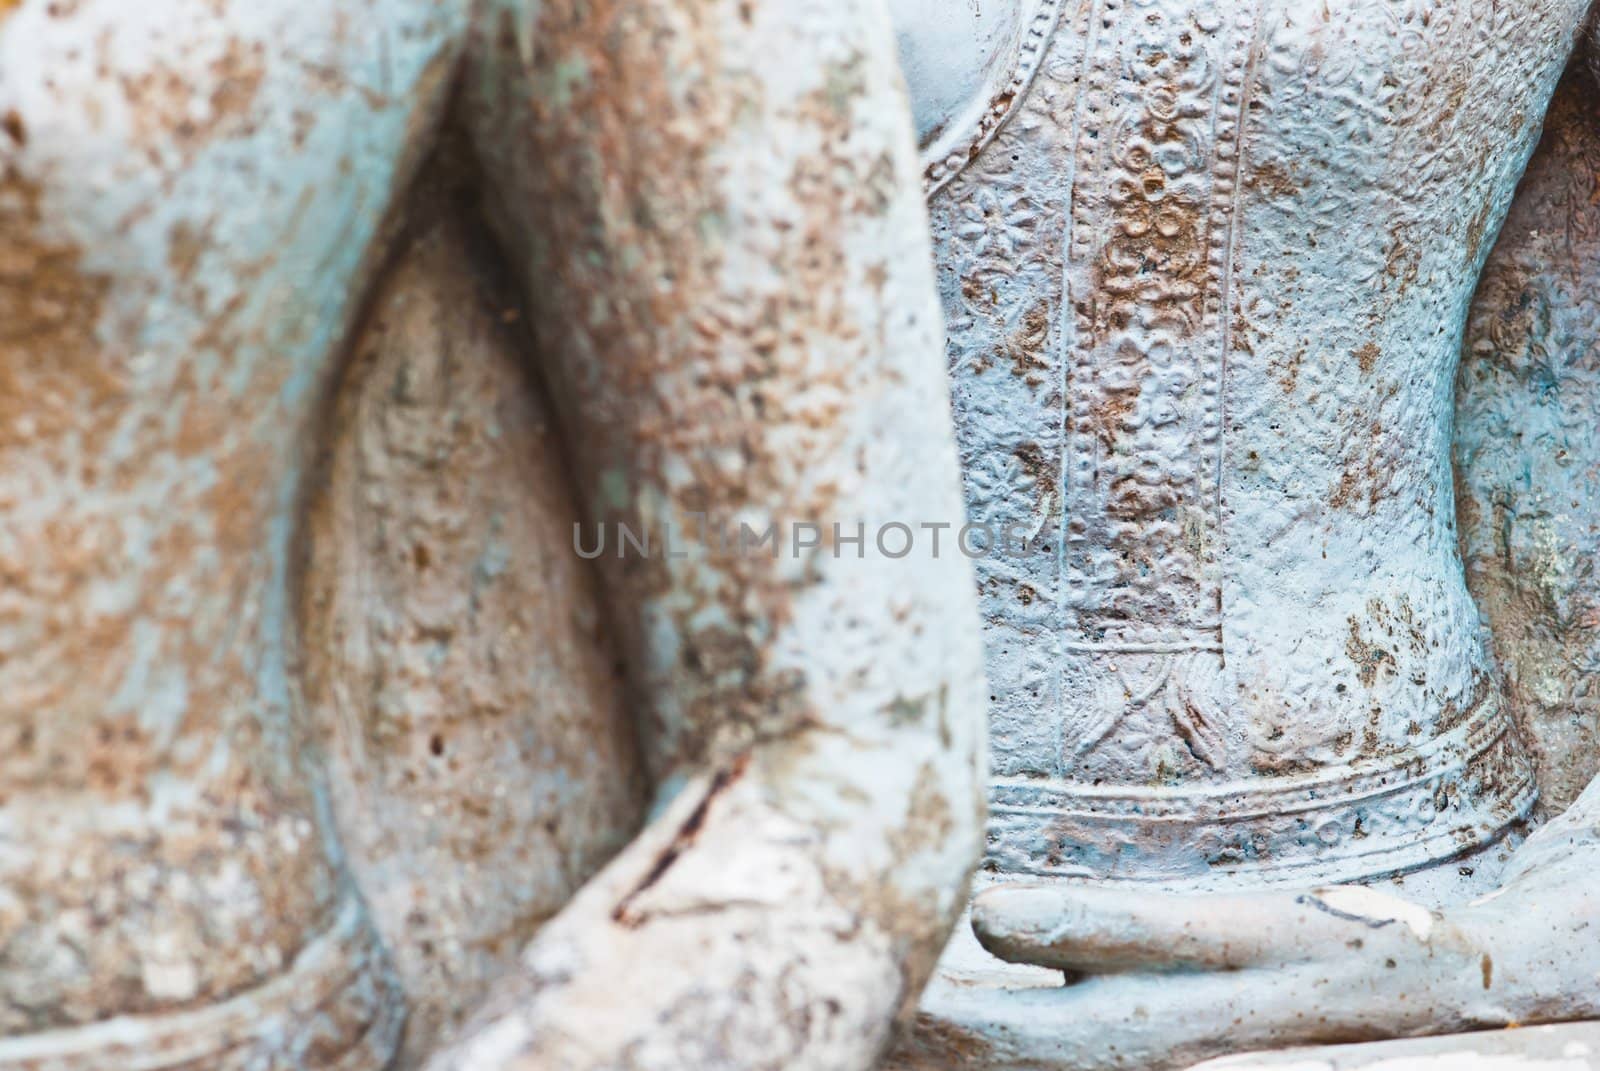 Old budda statue in isolation
 by sasilsolutions